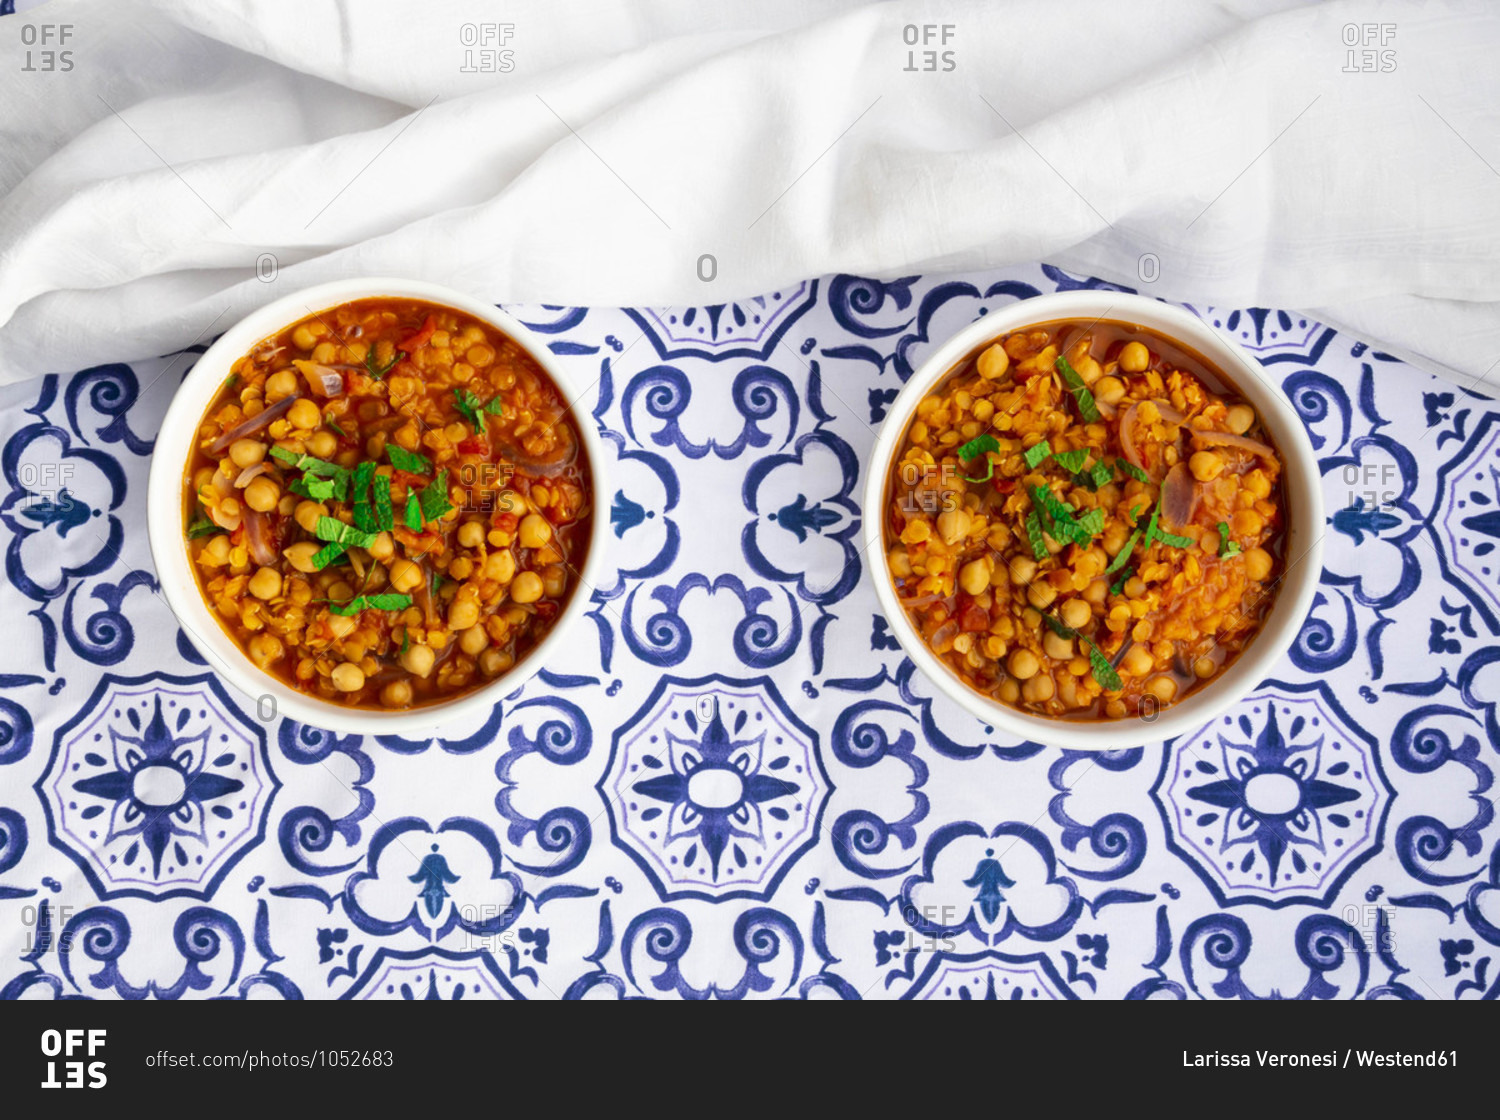 Two bowls of vegan stew with chick-peas- red lentils- tomatoes- Spanish onions and mint